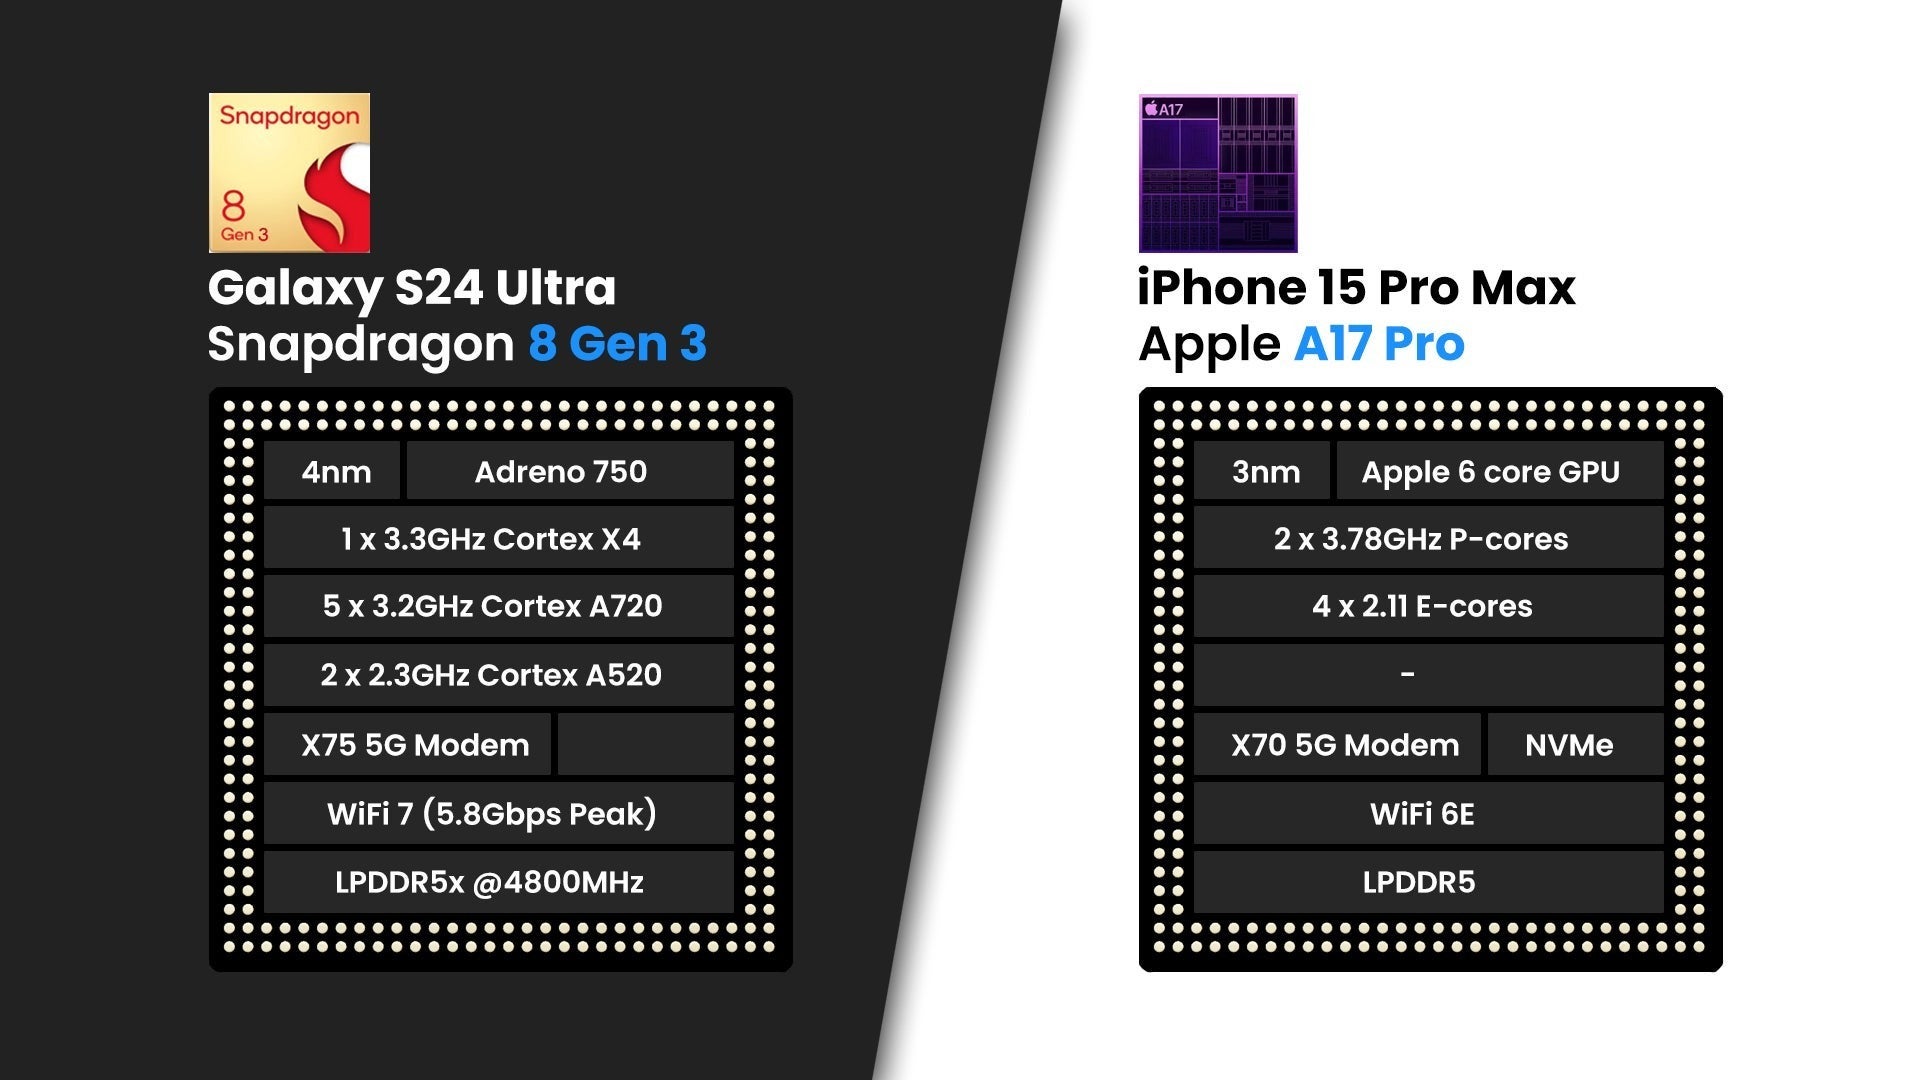 The S24 Ultra 5G modem specs are again superior to the 15 Pro Max&quot;&amp;nbsp - Can S24 on T-Mobile beat iPhone&#039;s 5G speeds after Apple swallowed its modem pride?